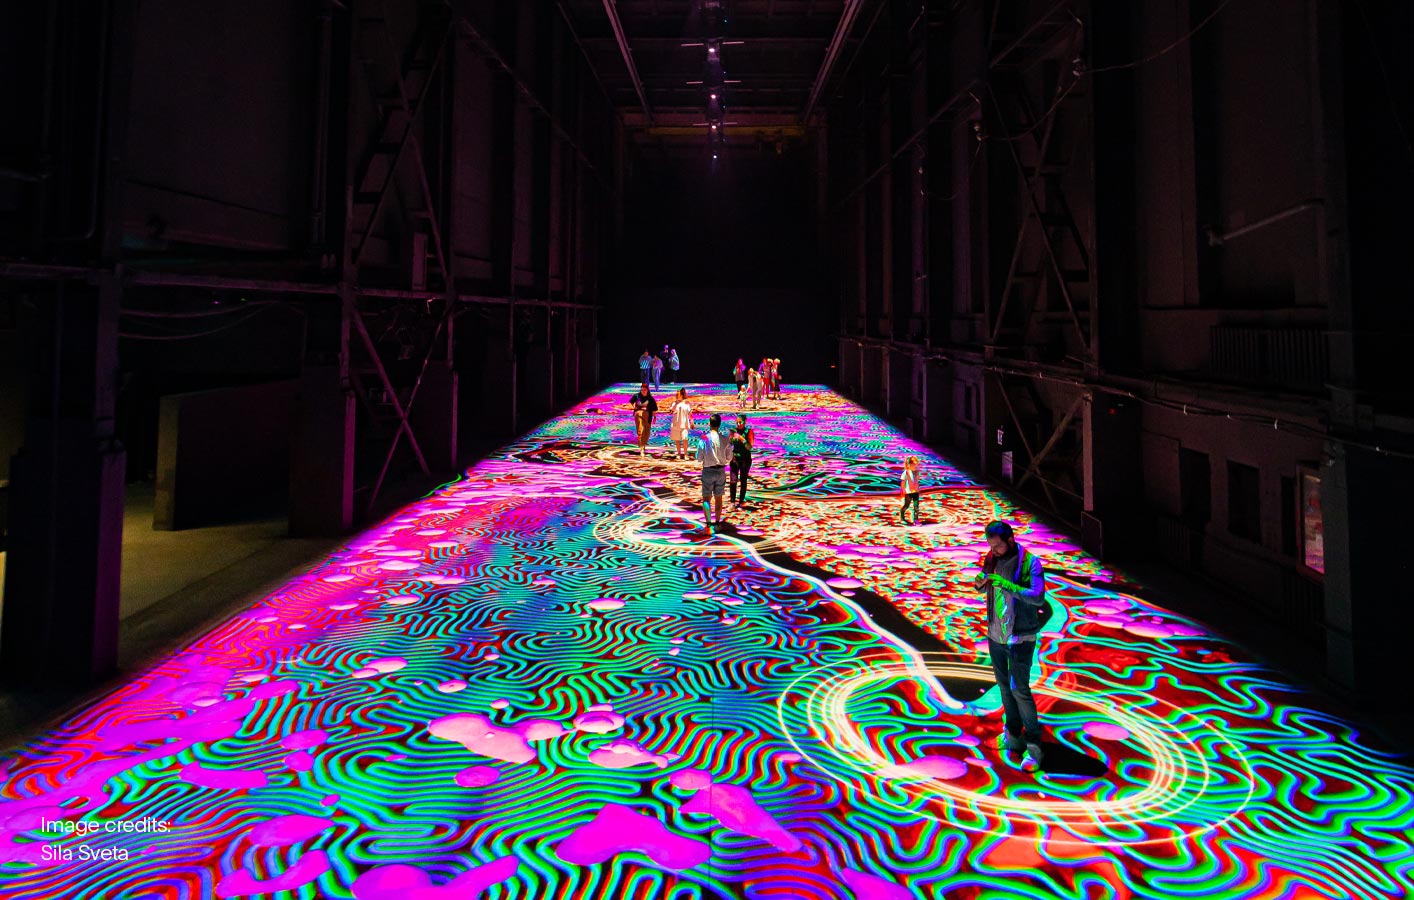 disguise serves up dynamic content for Sila Sveta’s IN TO immersive installation